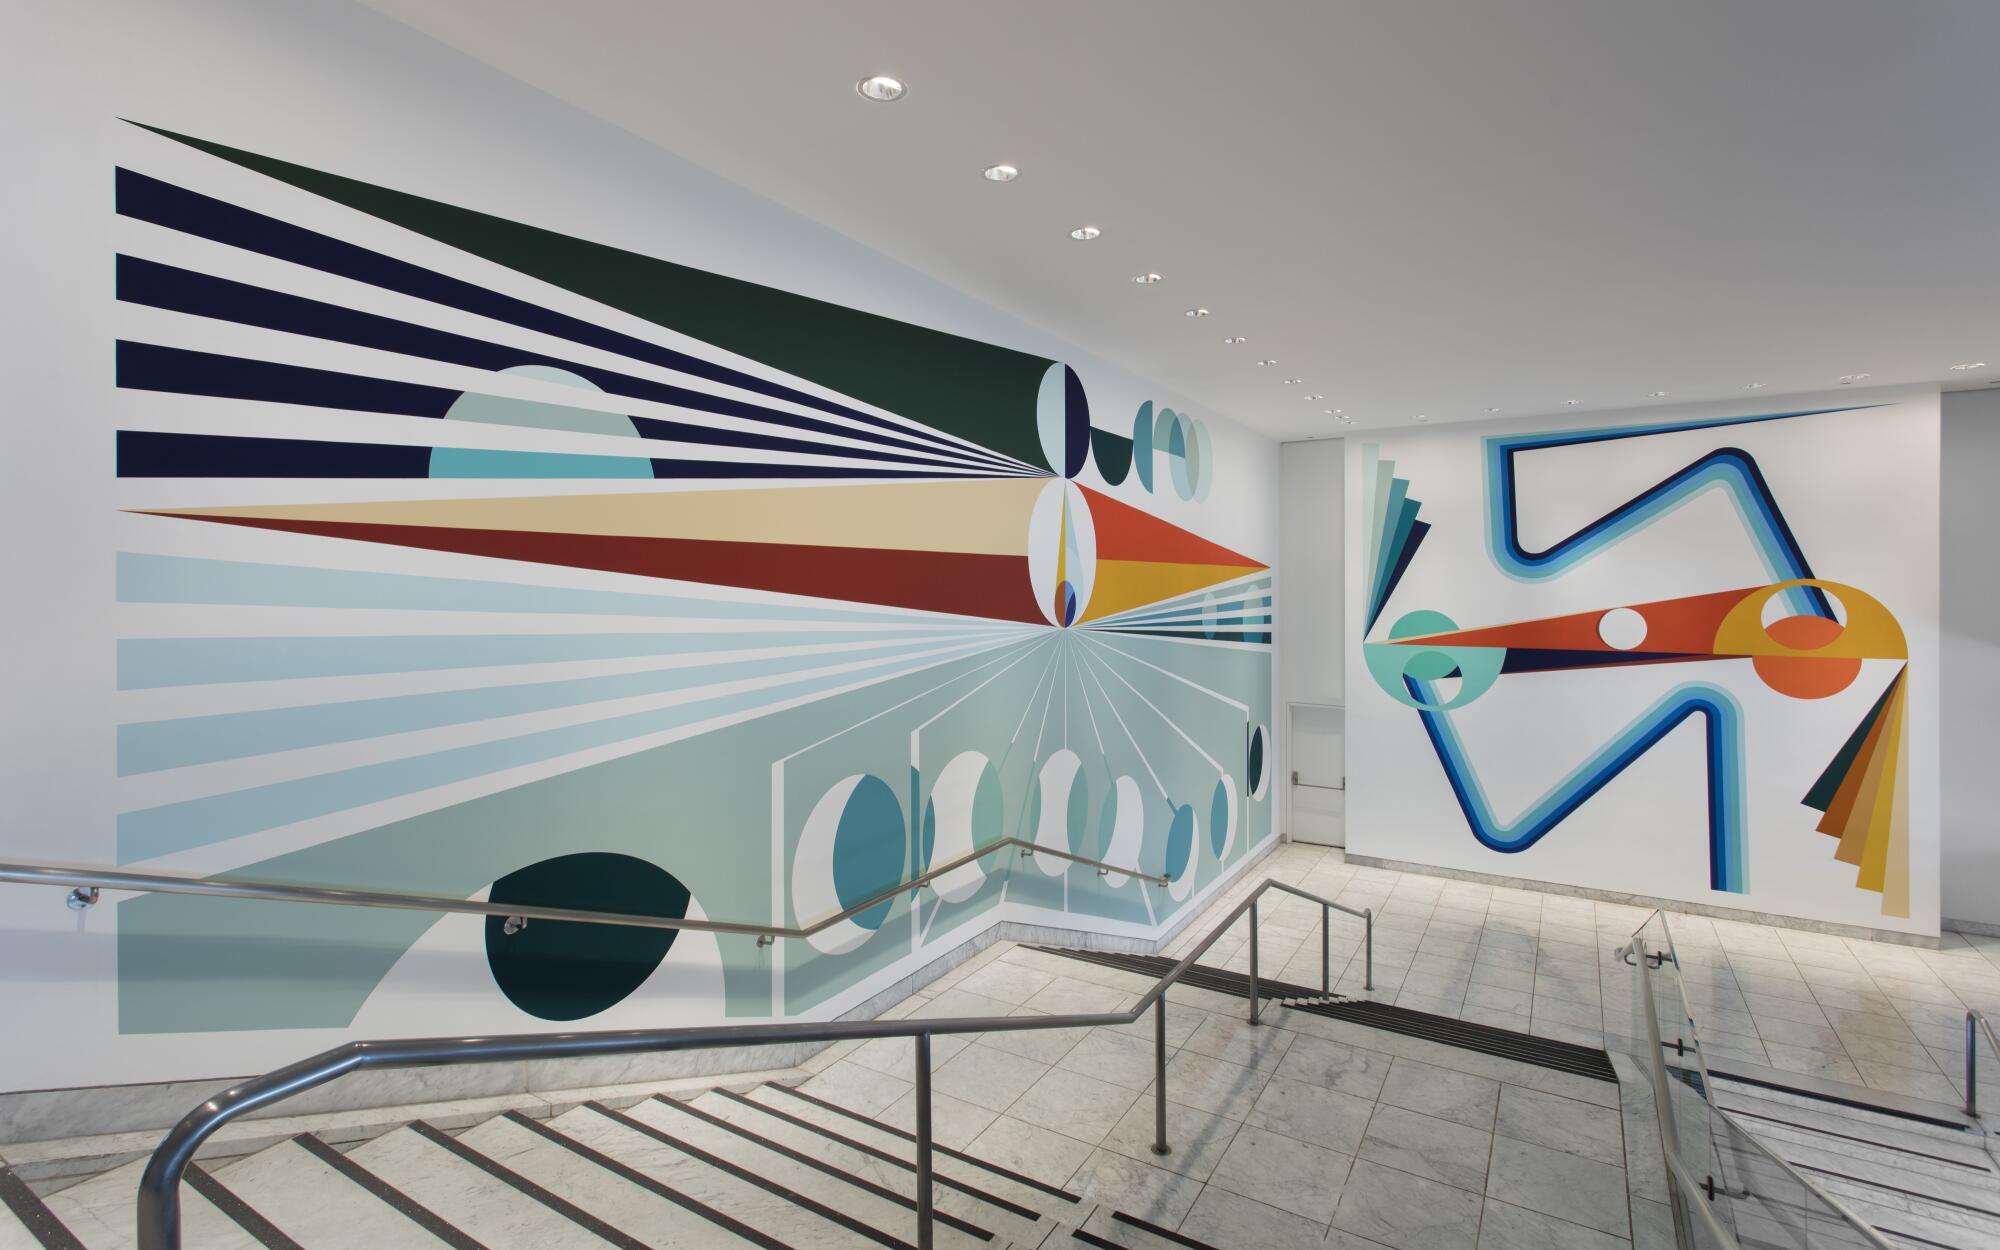 A large mural of geometric forms, including circular patterns and bands of color that evoke light, wrap around stairs